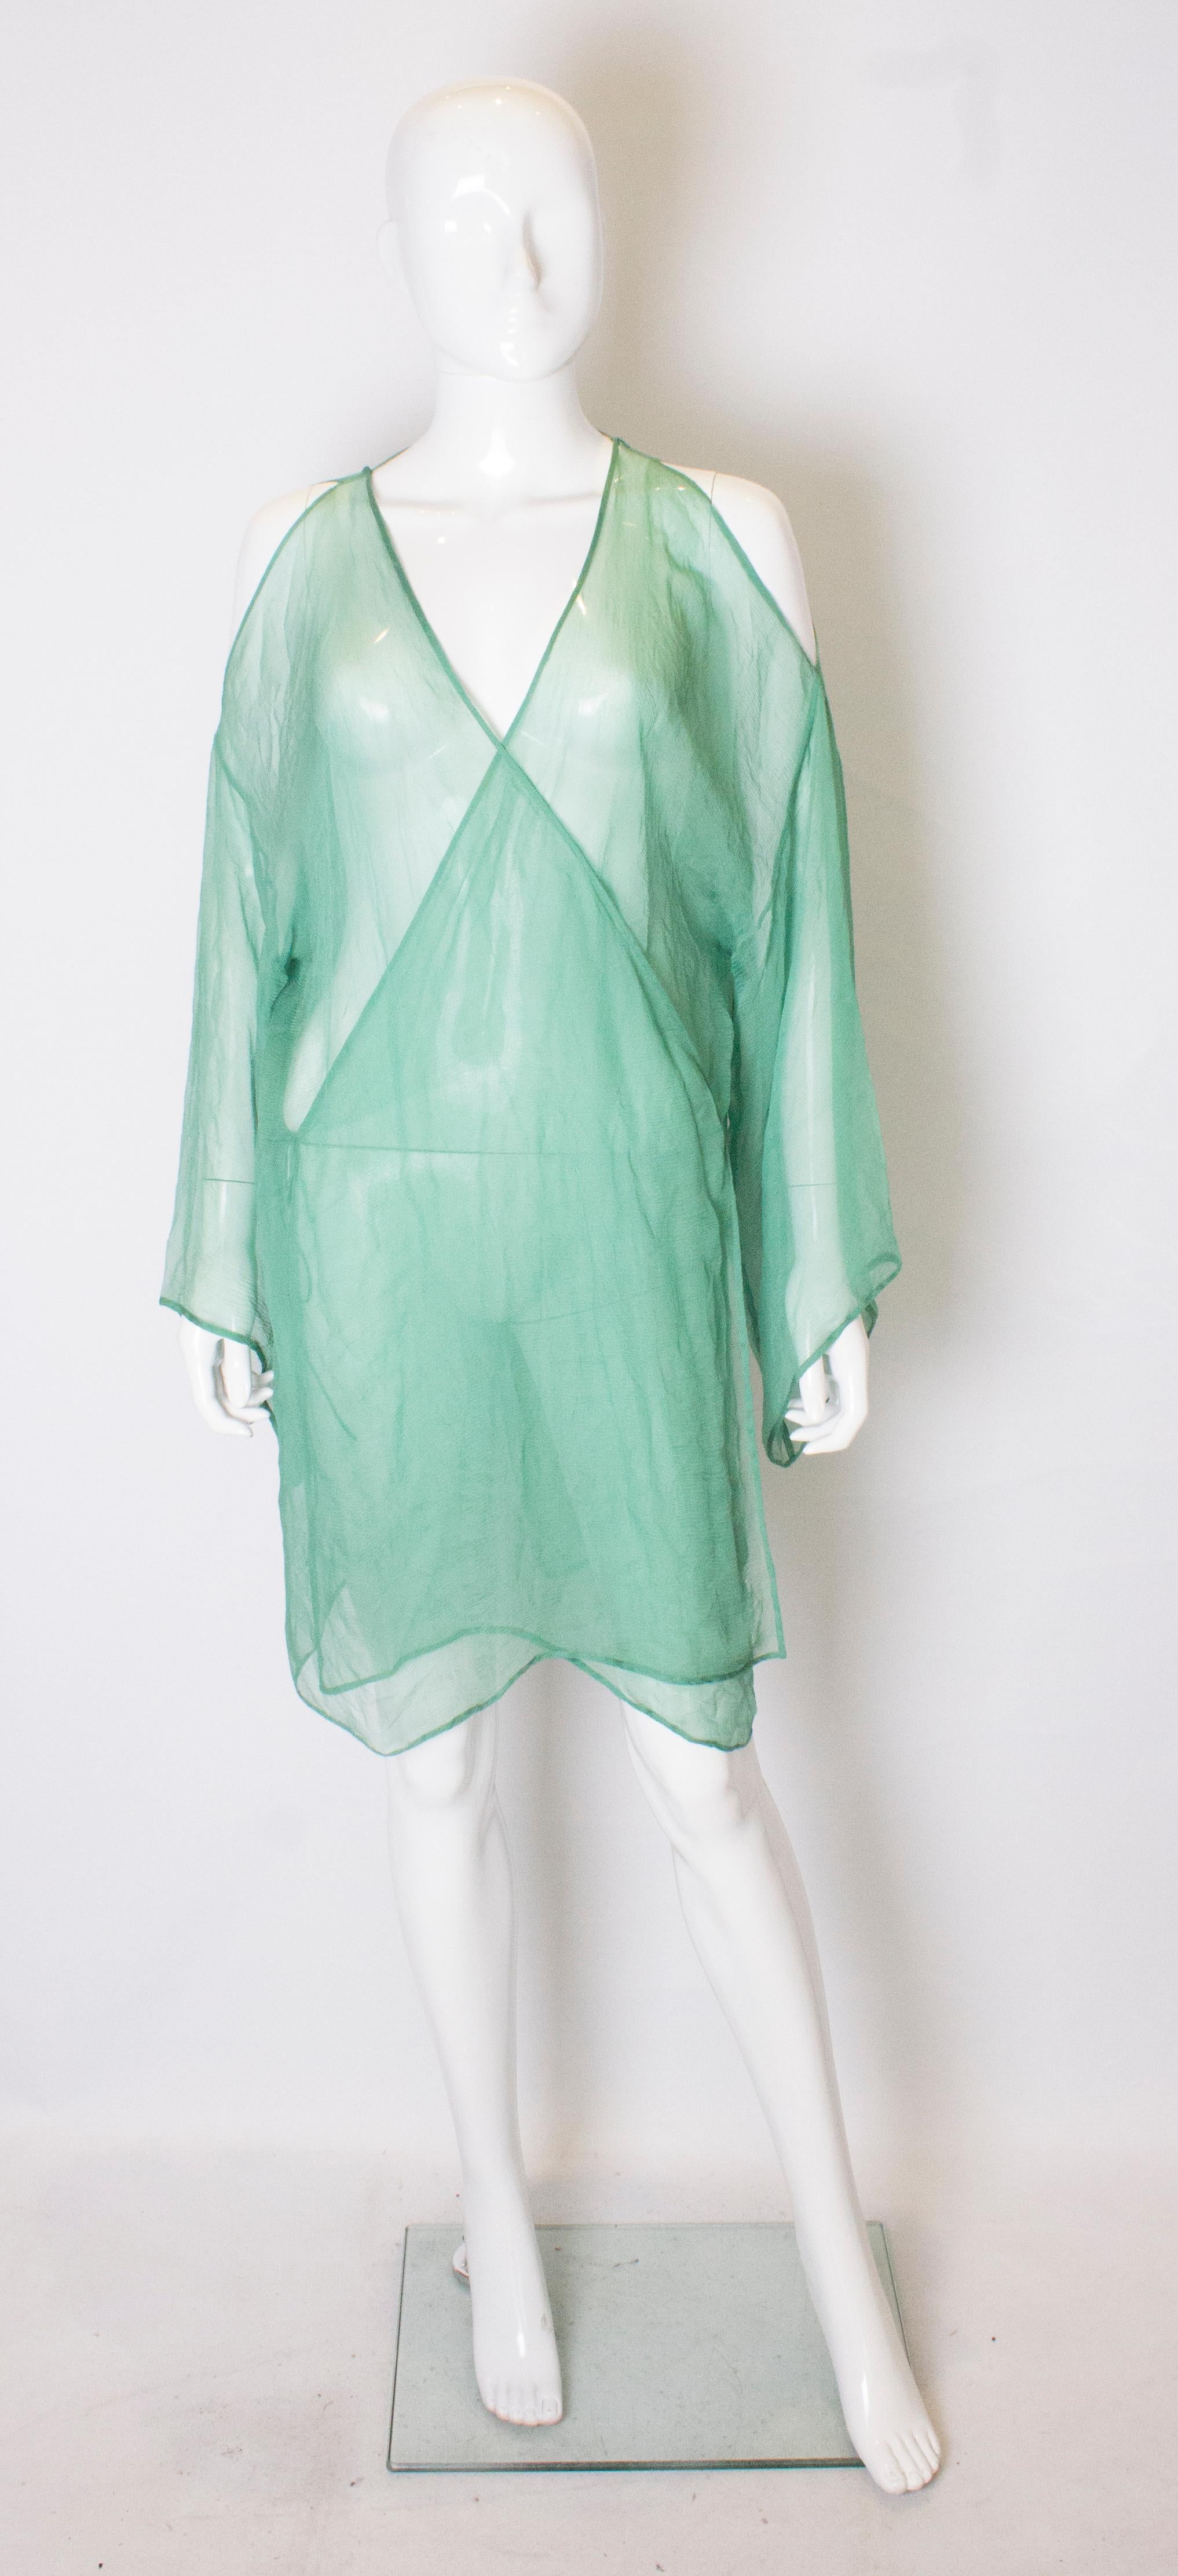 A great, green vintage silk chiffon top. The top has a v neckline and backine, and elbow length sleaves.